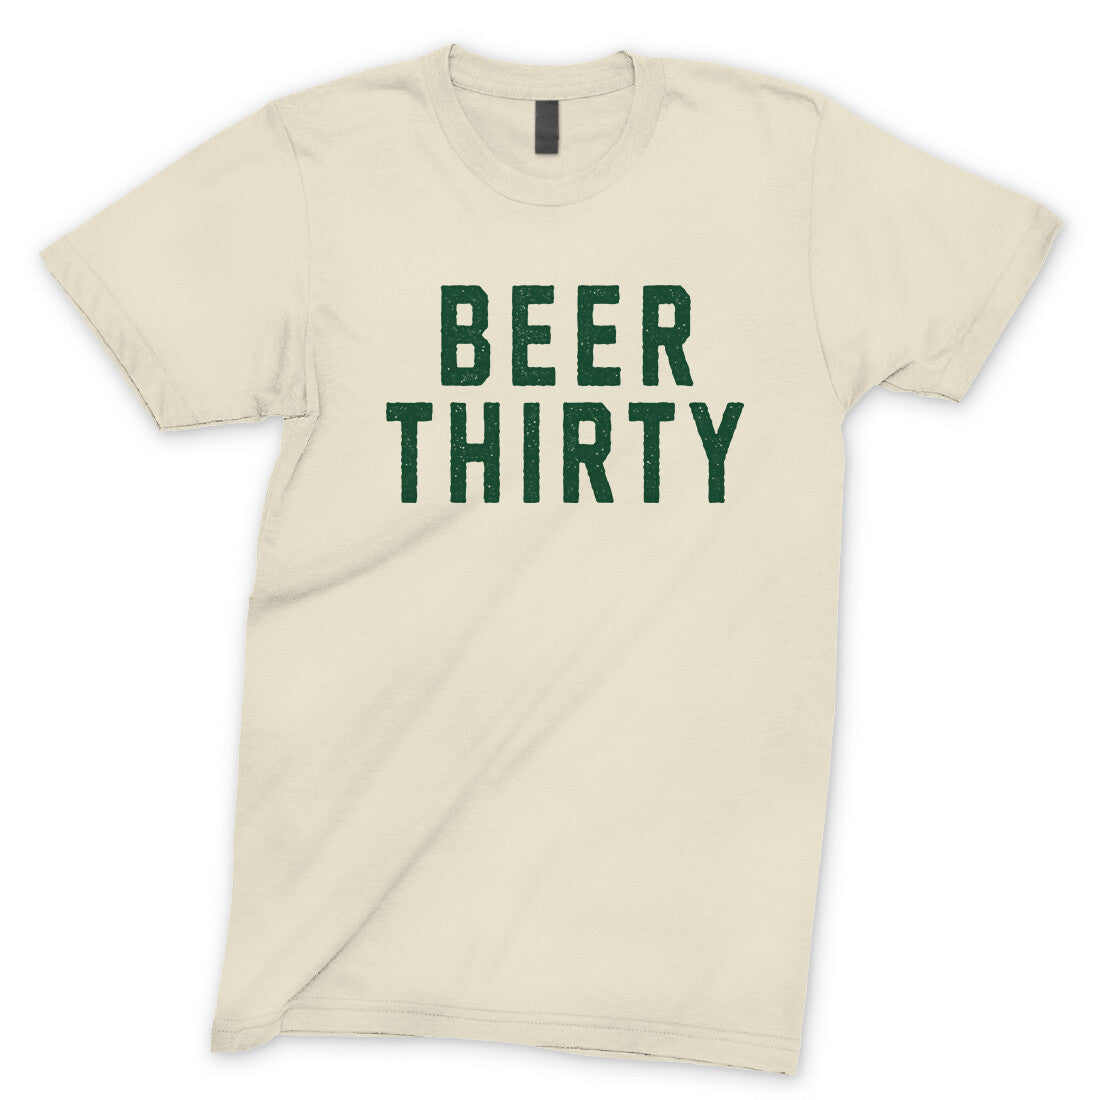 Beer Thirty in Natural Color